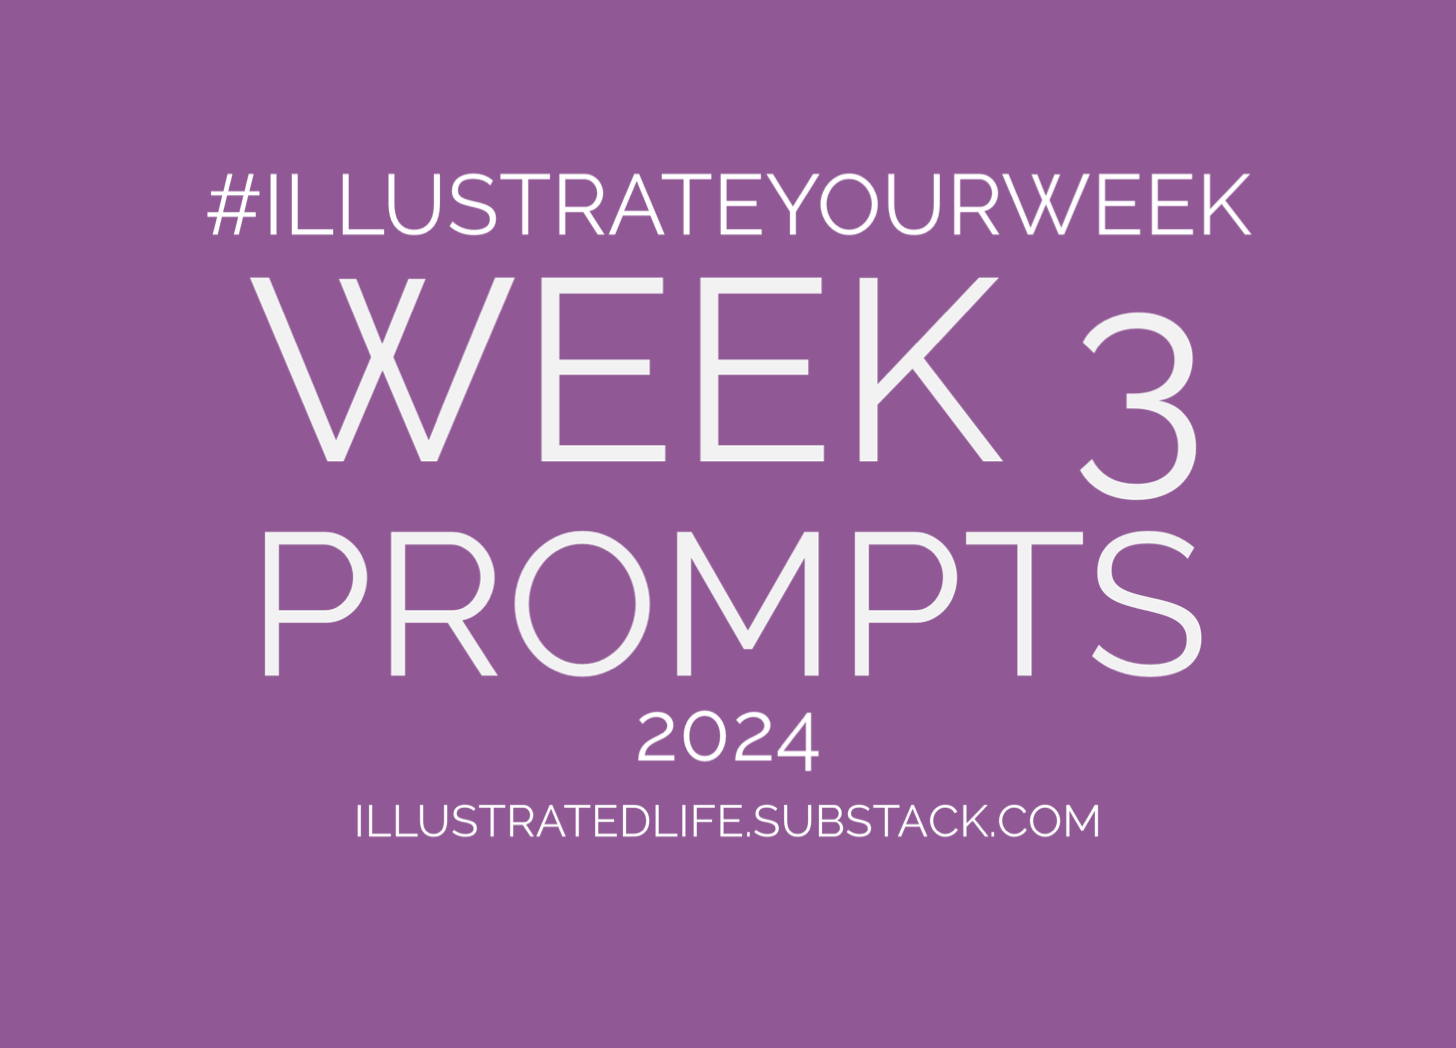 Week 3 Prompts for Illustrate Your Week 2024